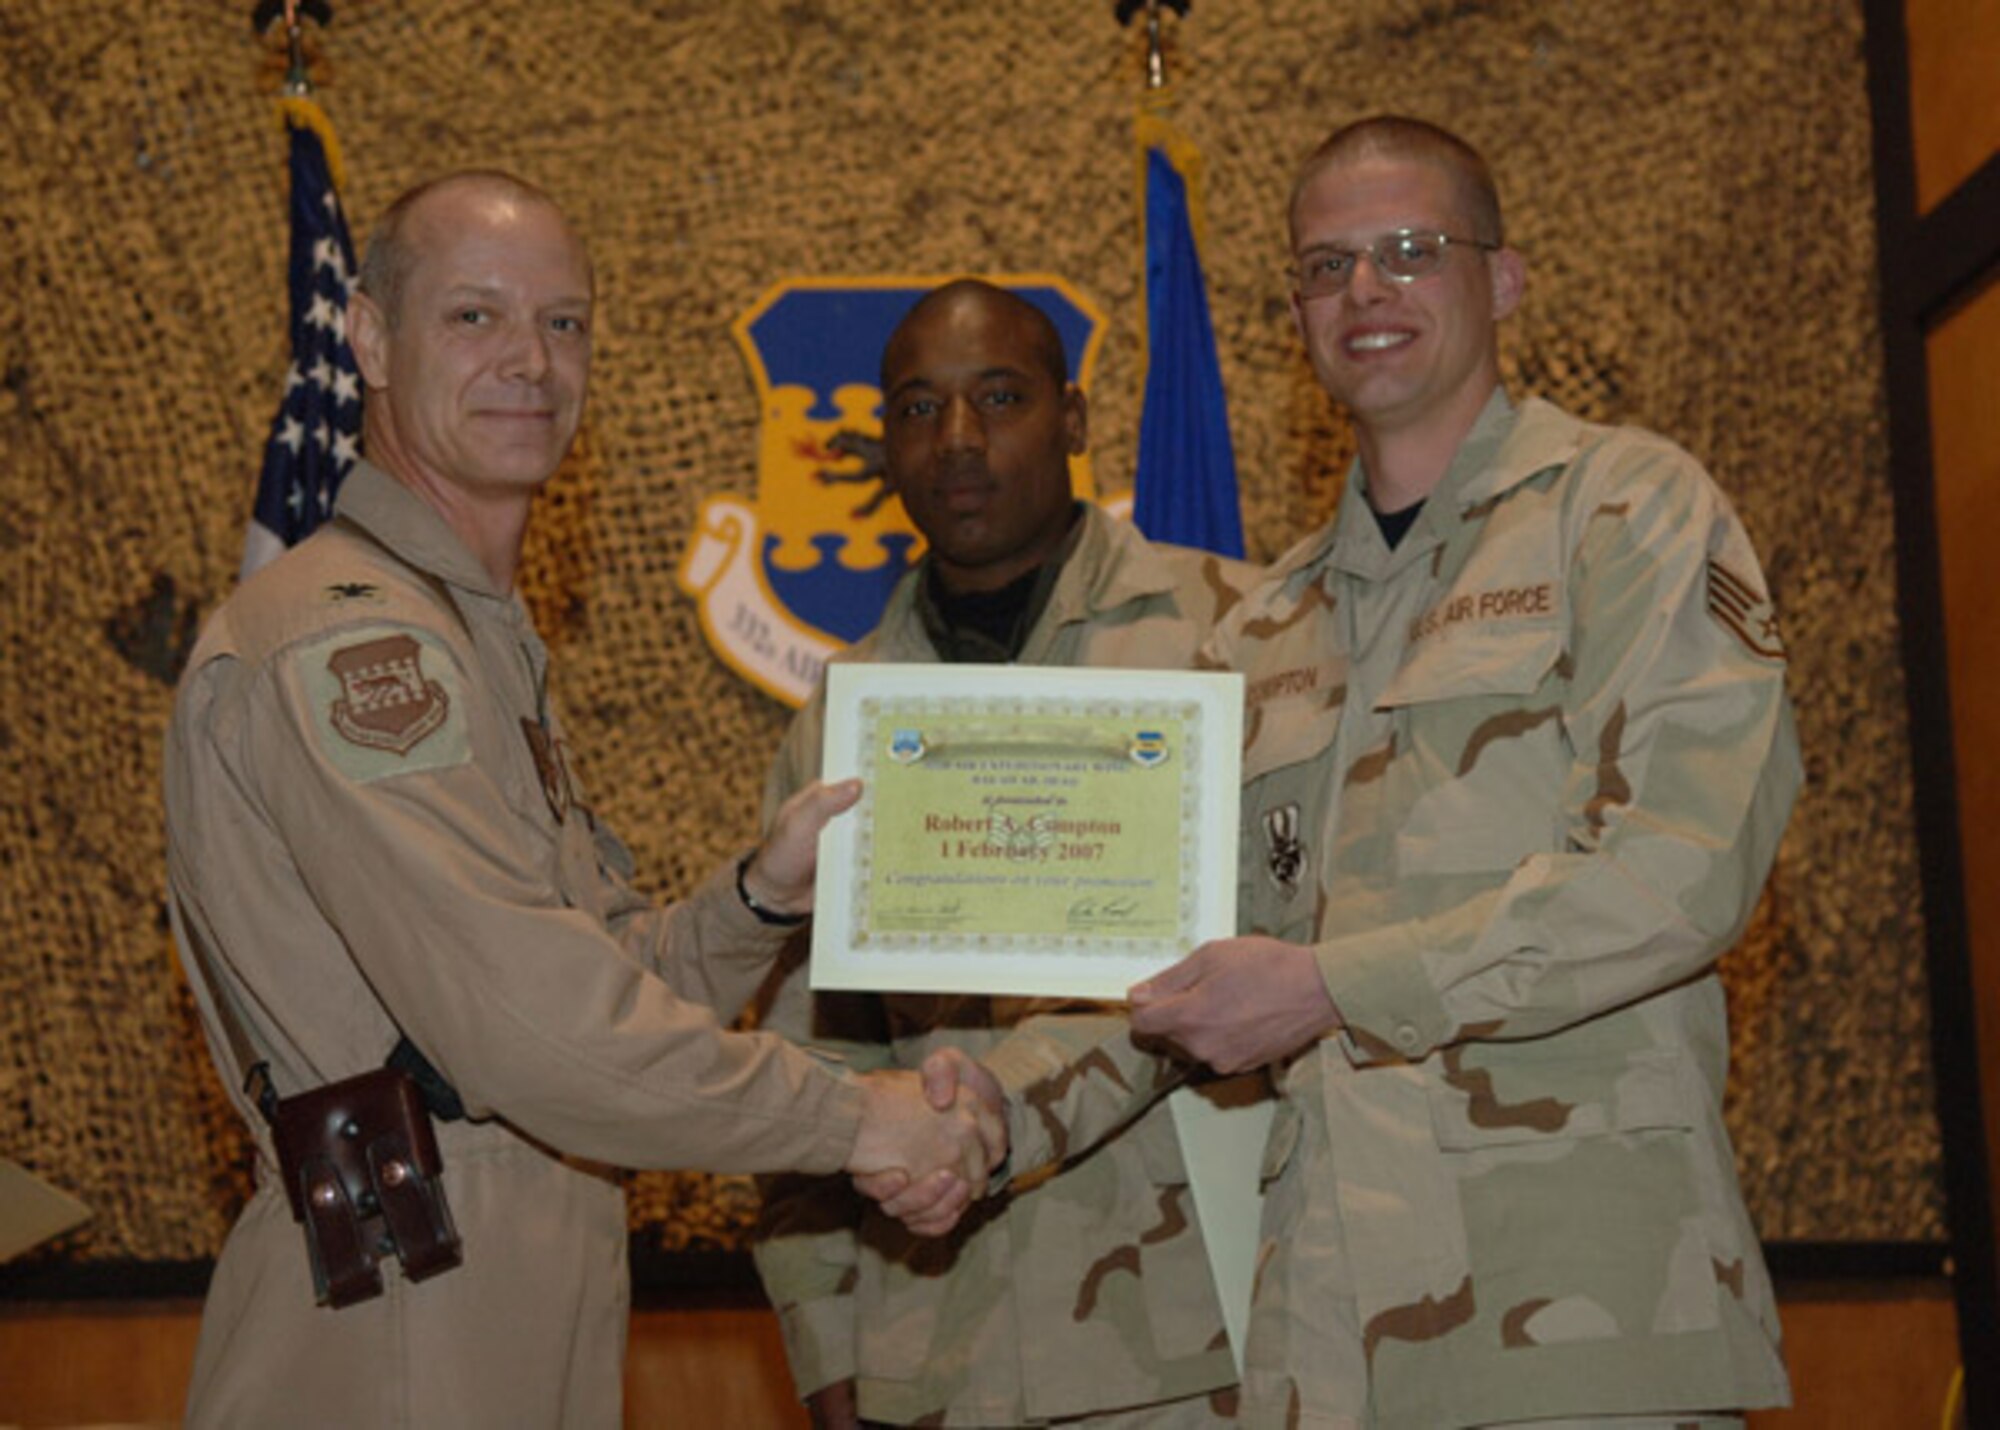 02/02/2007 -- SOUTHWEST ASIA -- Senior Airman Robert Compton, 35th Aircraft Maintenance  Squadron, receives a certificiate from his deployed commander at Balad Air Base, Iraq. (U.S. Air Force photo)